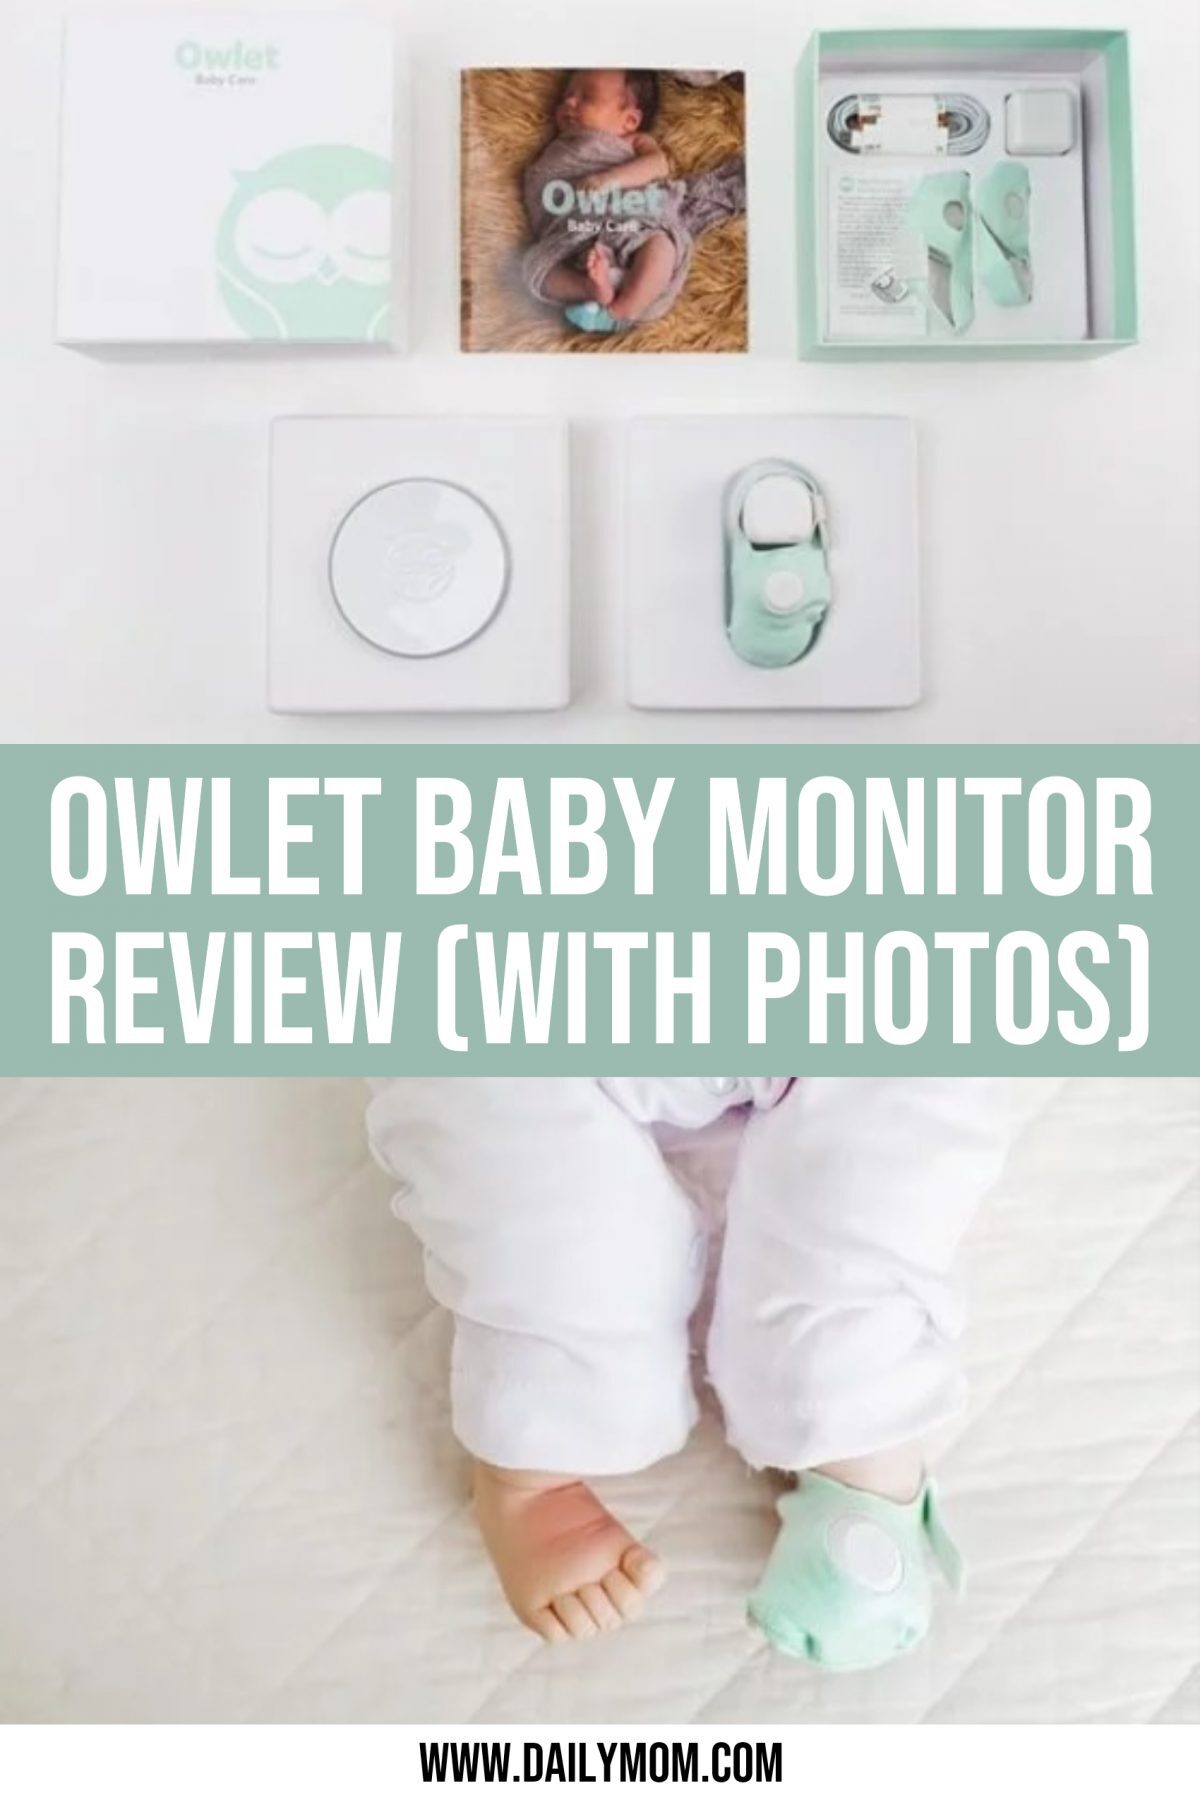 Owlet Baby Monitor Review (With Photos)